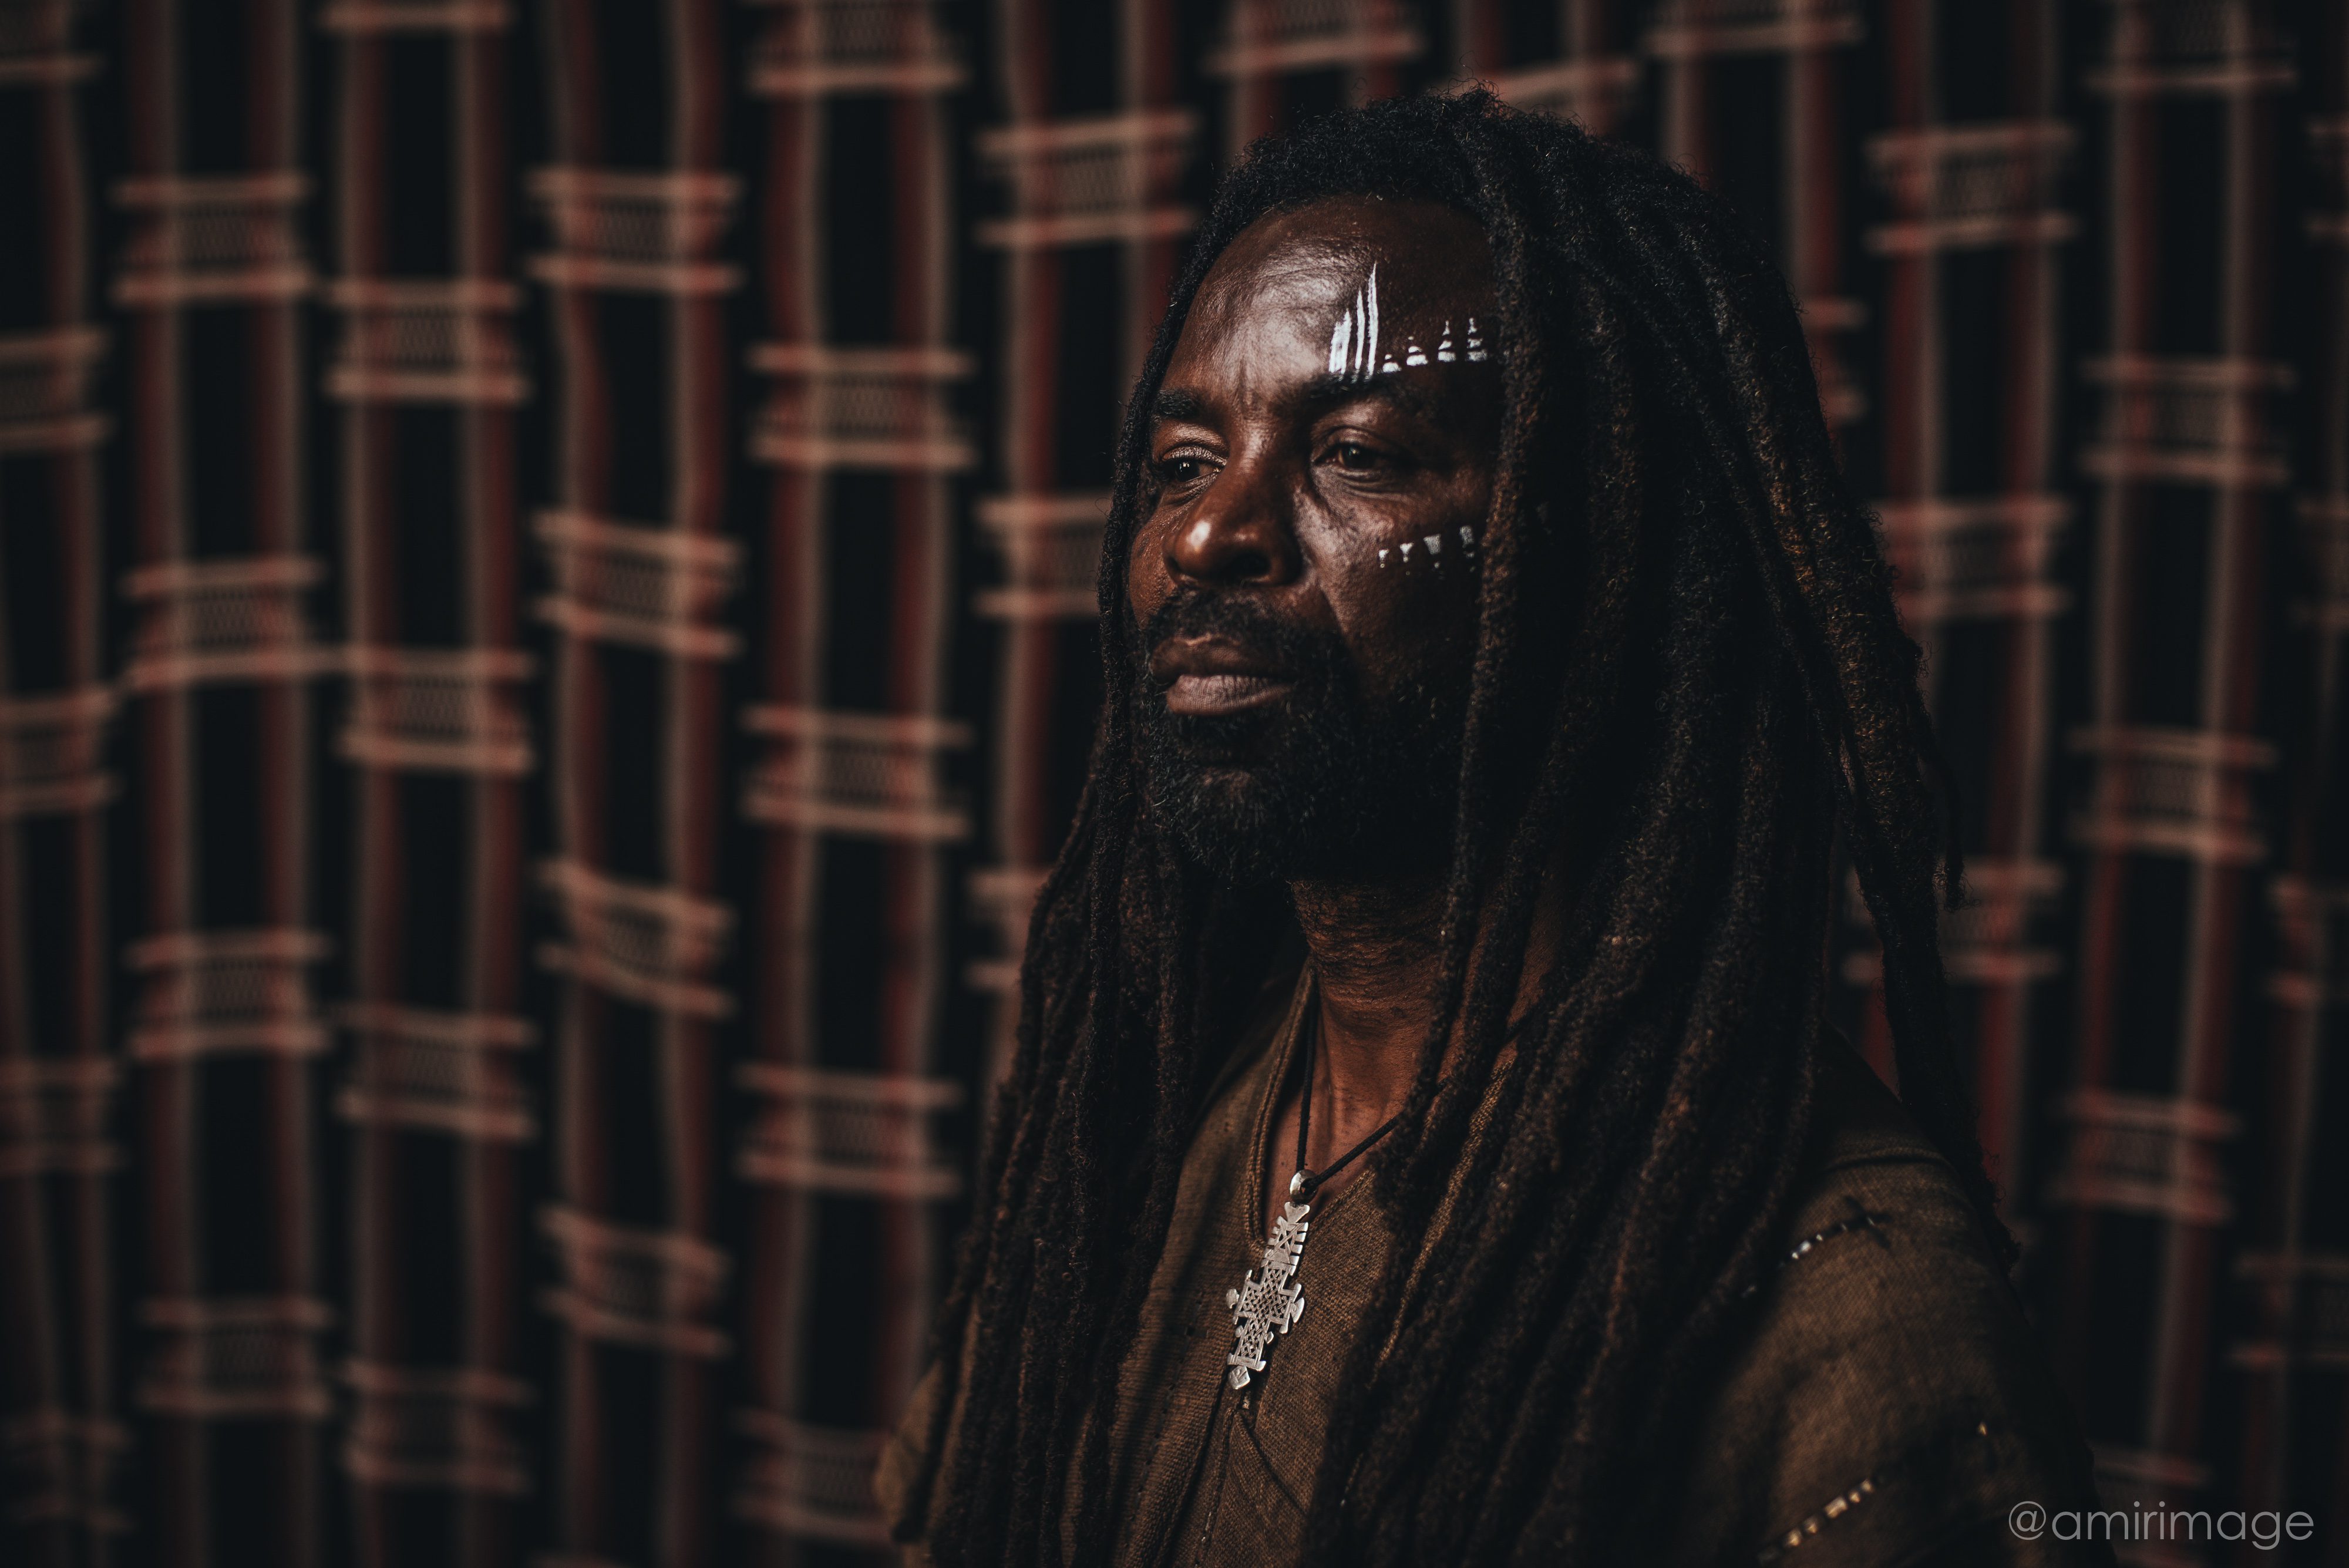 Rocky Dawuni announces “Beats Of Zion” Album release via Play Africa on March 8th